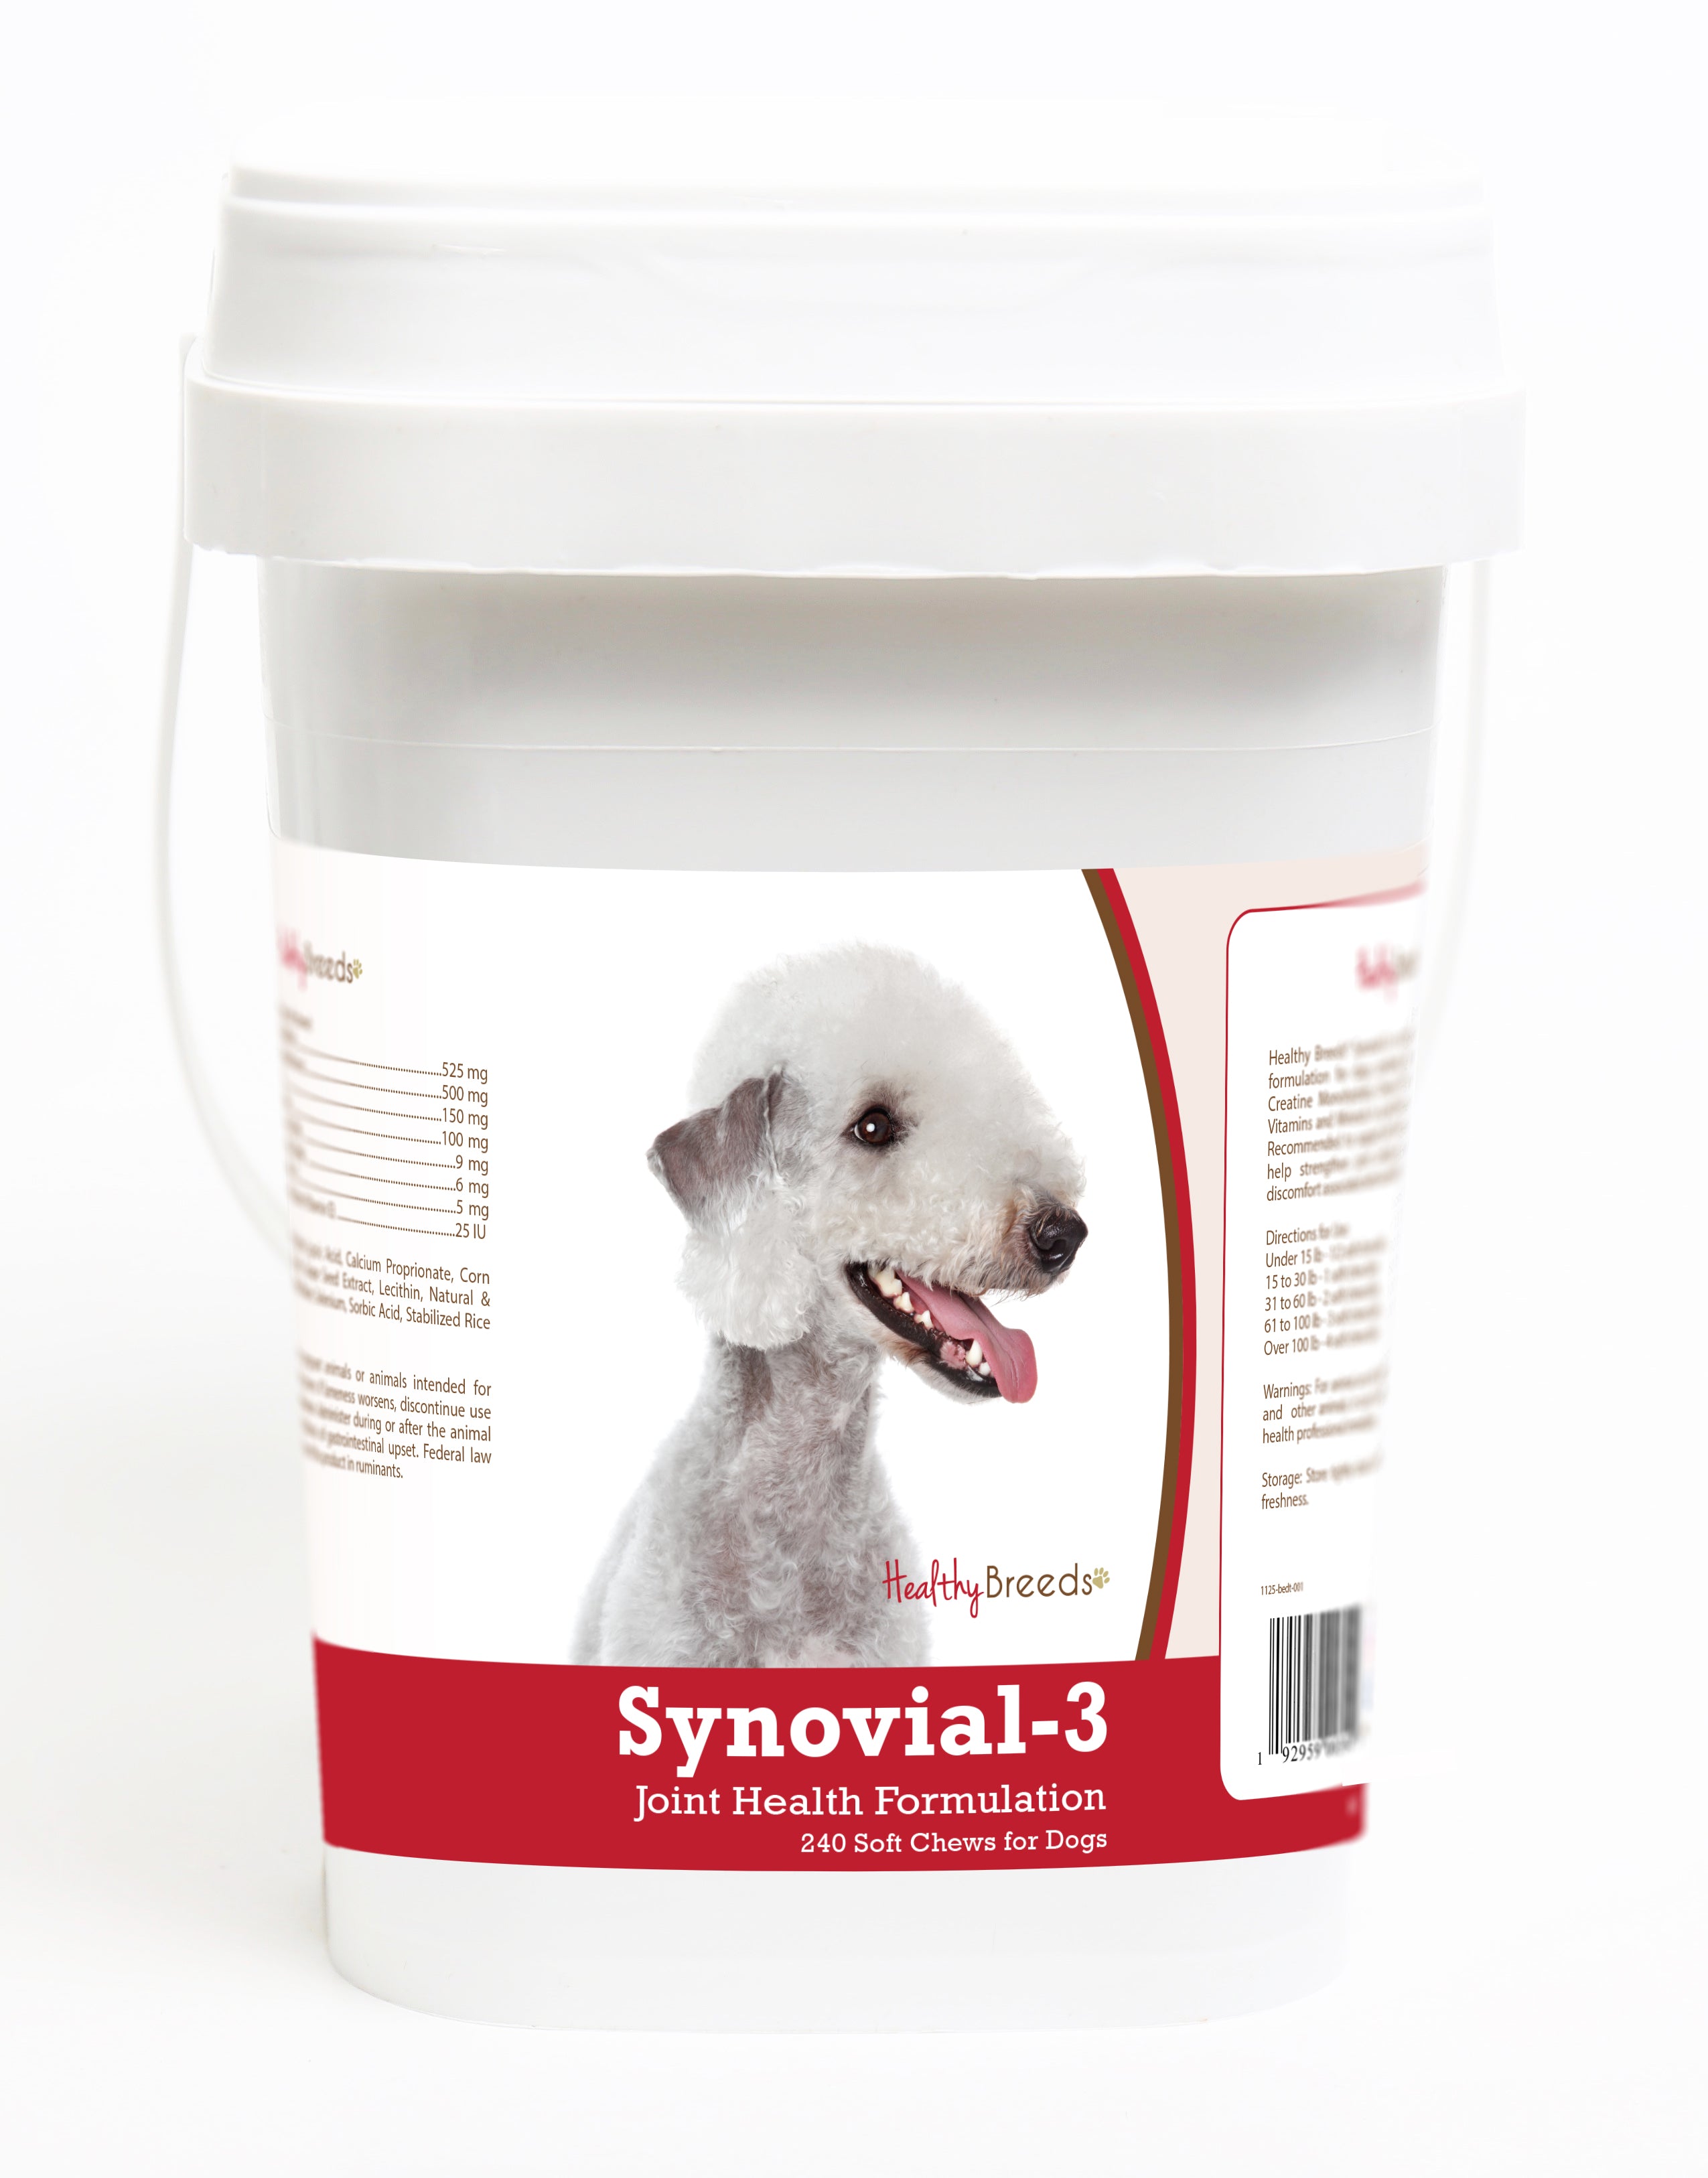 Bedlington Terrier Synovial-3 Joint Health Formulation Soft Chews 240 Count